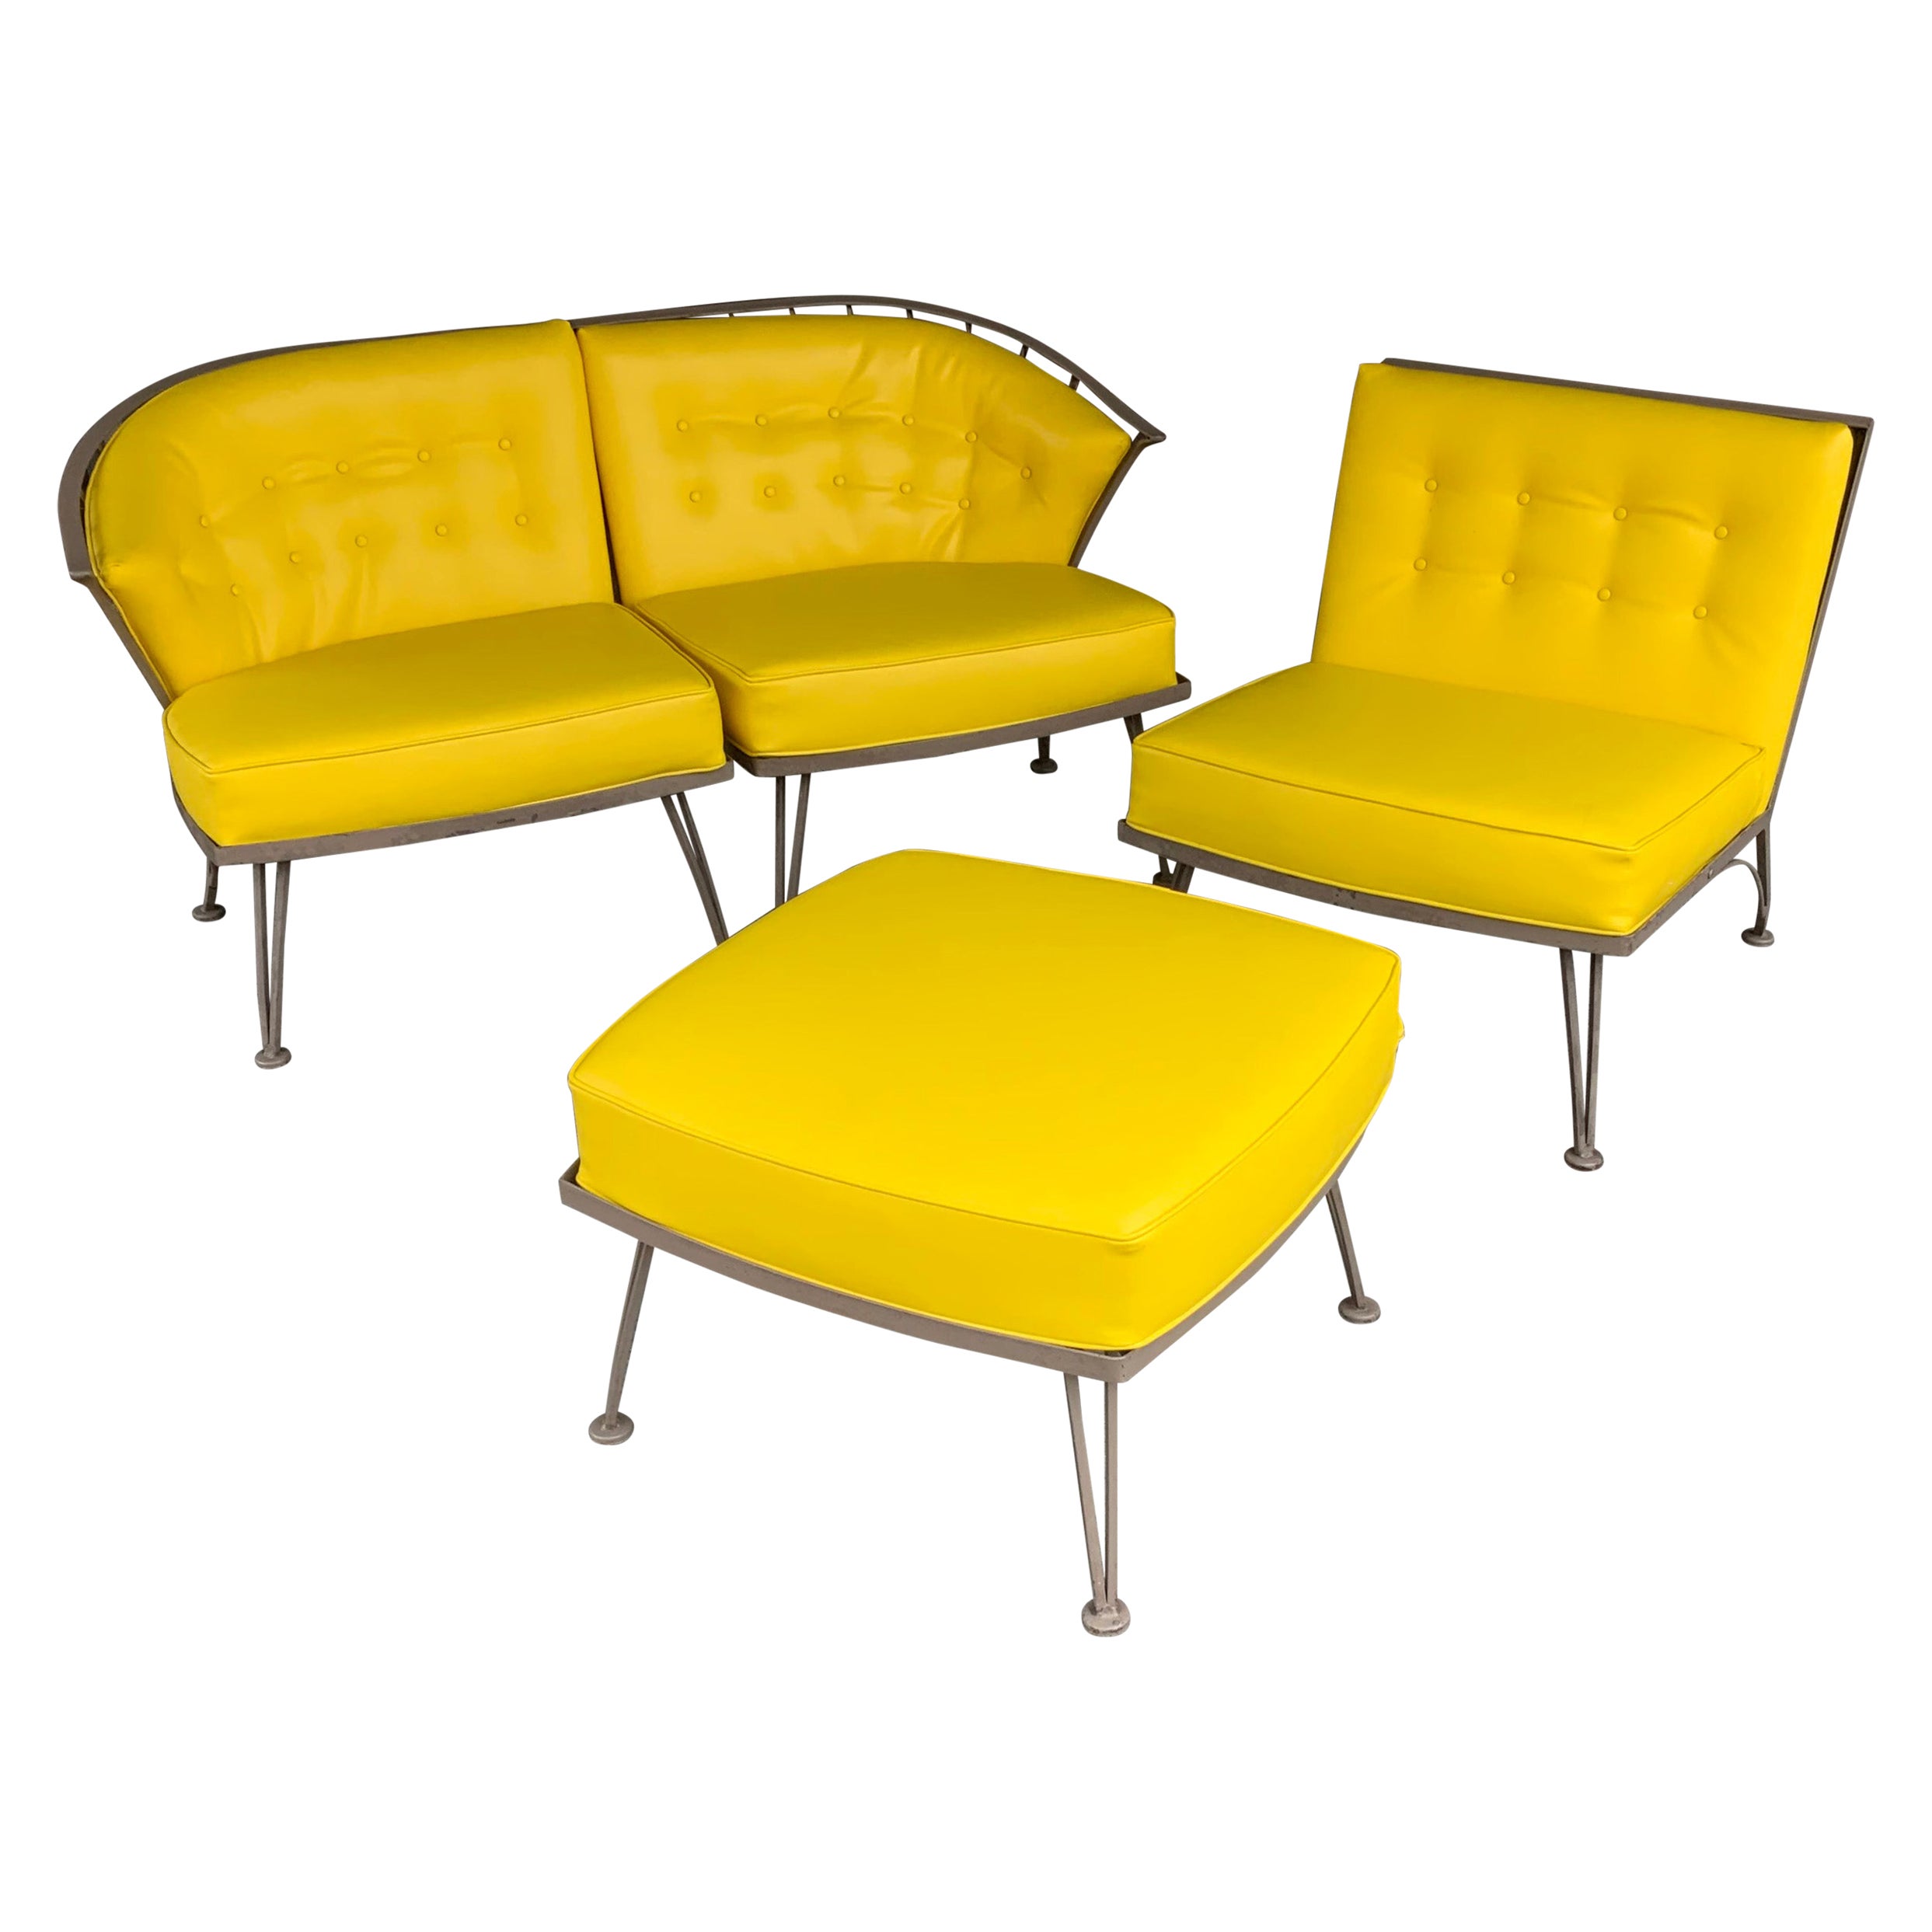 Beautiful 1950's Pinecrest Lounge Sofa & Chair by Woodard For Sale